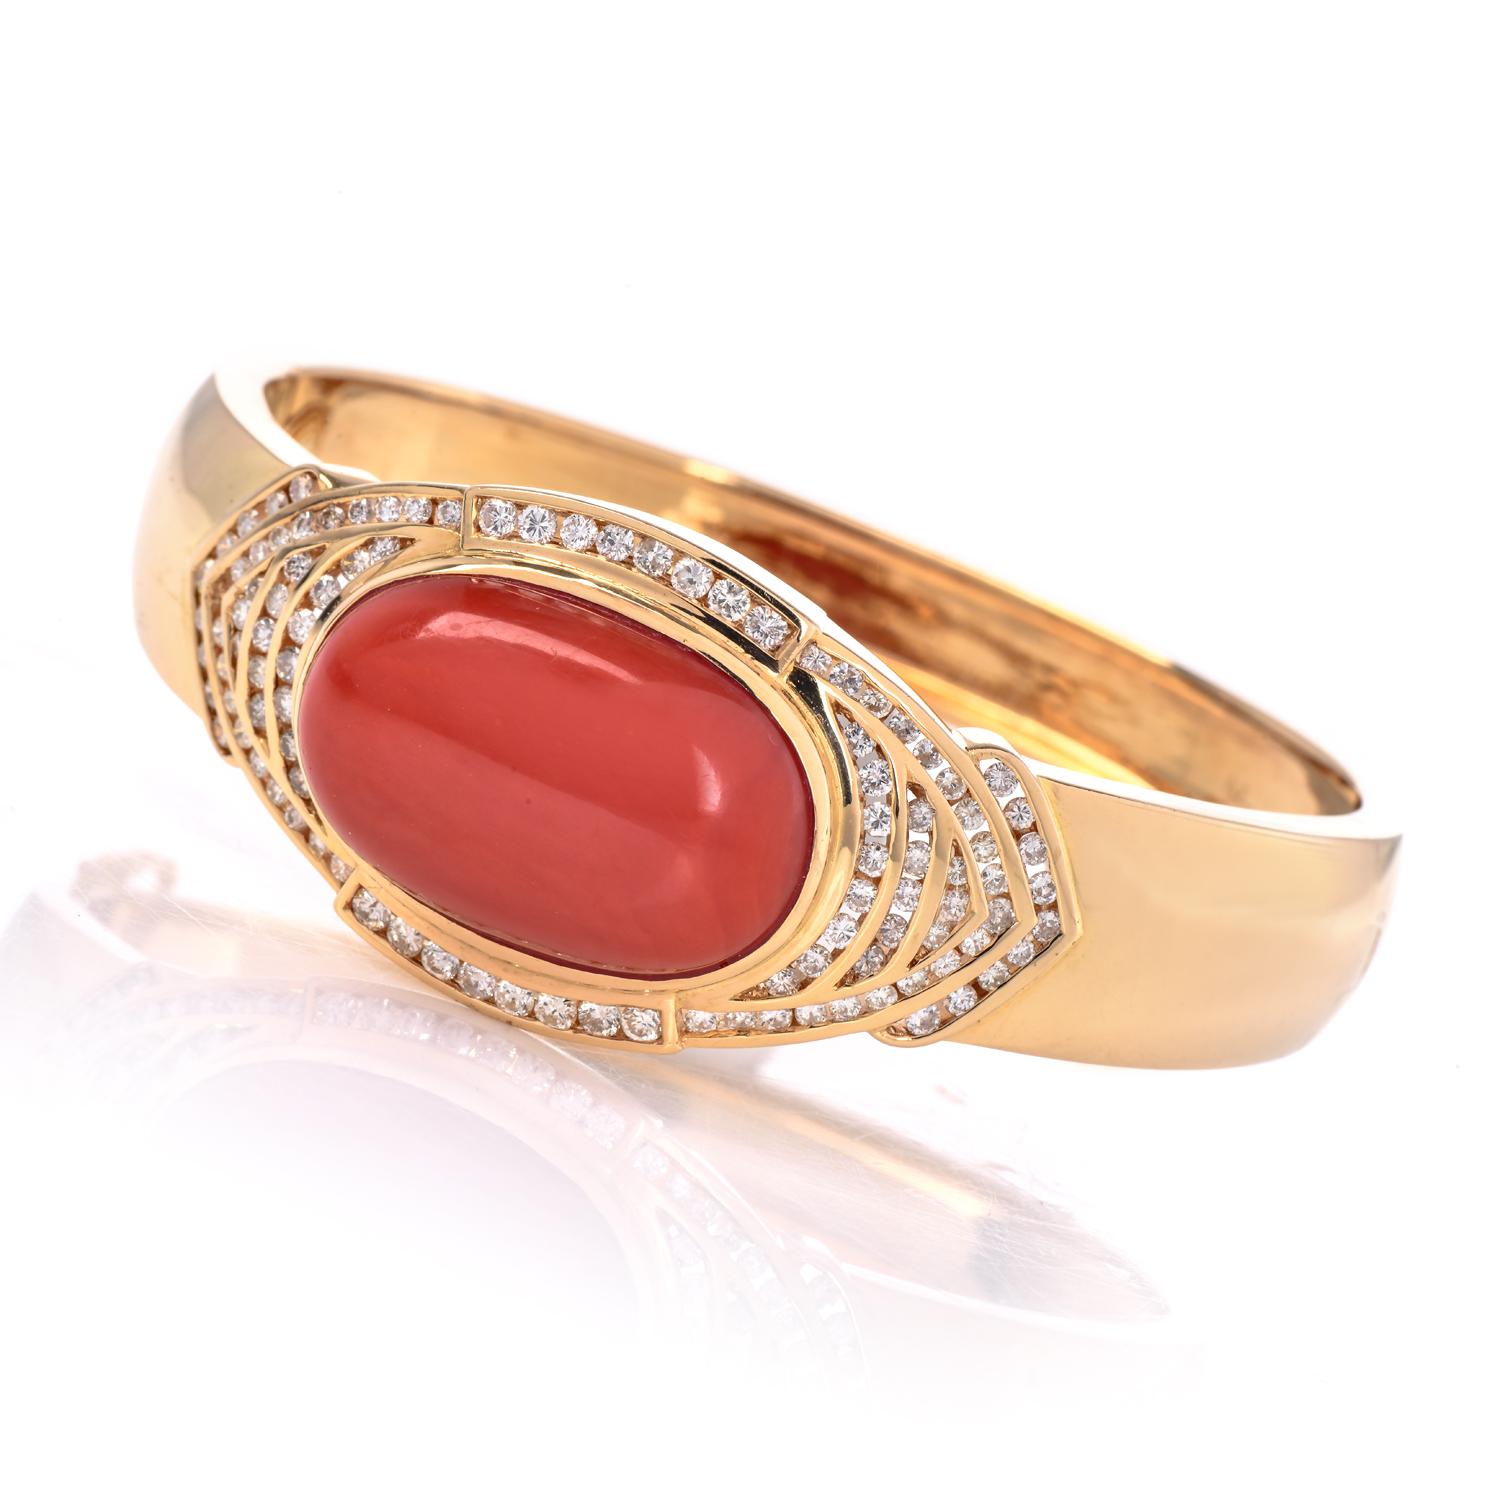 natural Red Coral Certified by GIA and Diamonds Statement Cuff Bracelet in 18K Yellow Gold. The Coral is an Oval Double Cabochon cut that is a semi-translucent red-orange color with no indication of a Dye Bezel set in the center.

The Diamonds are